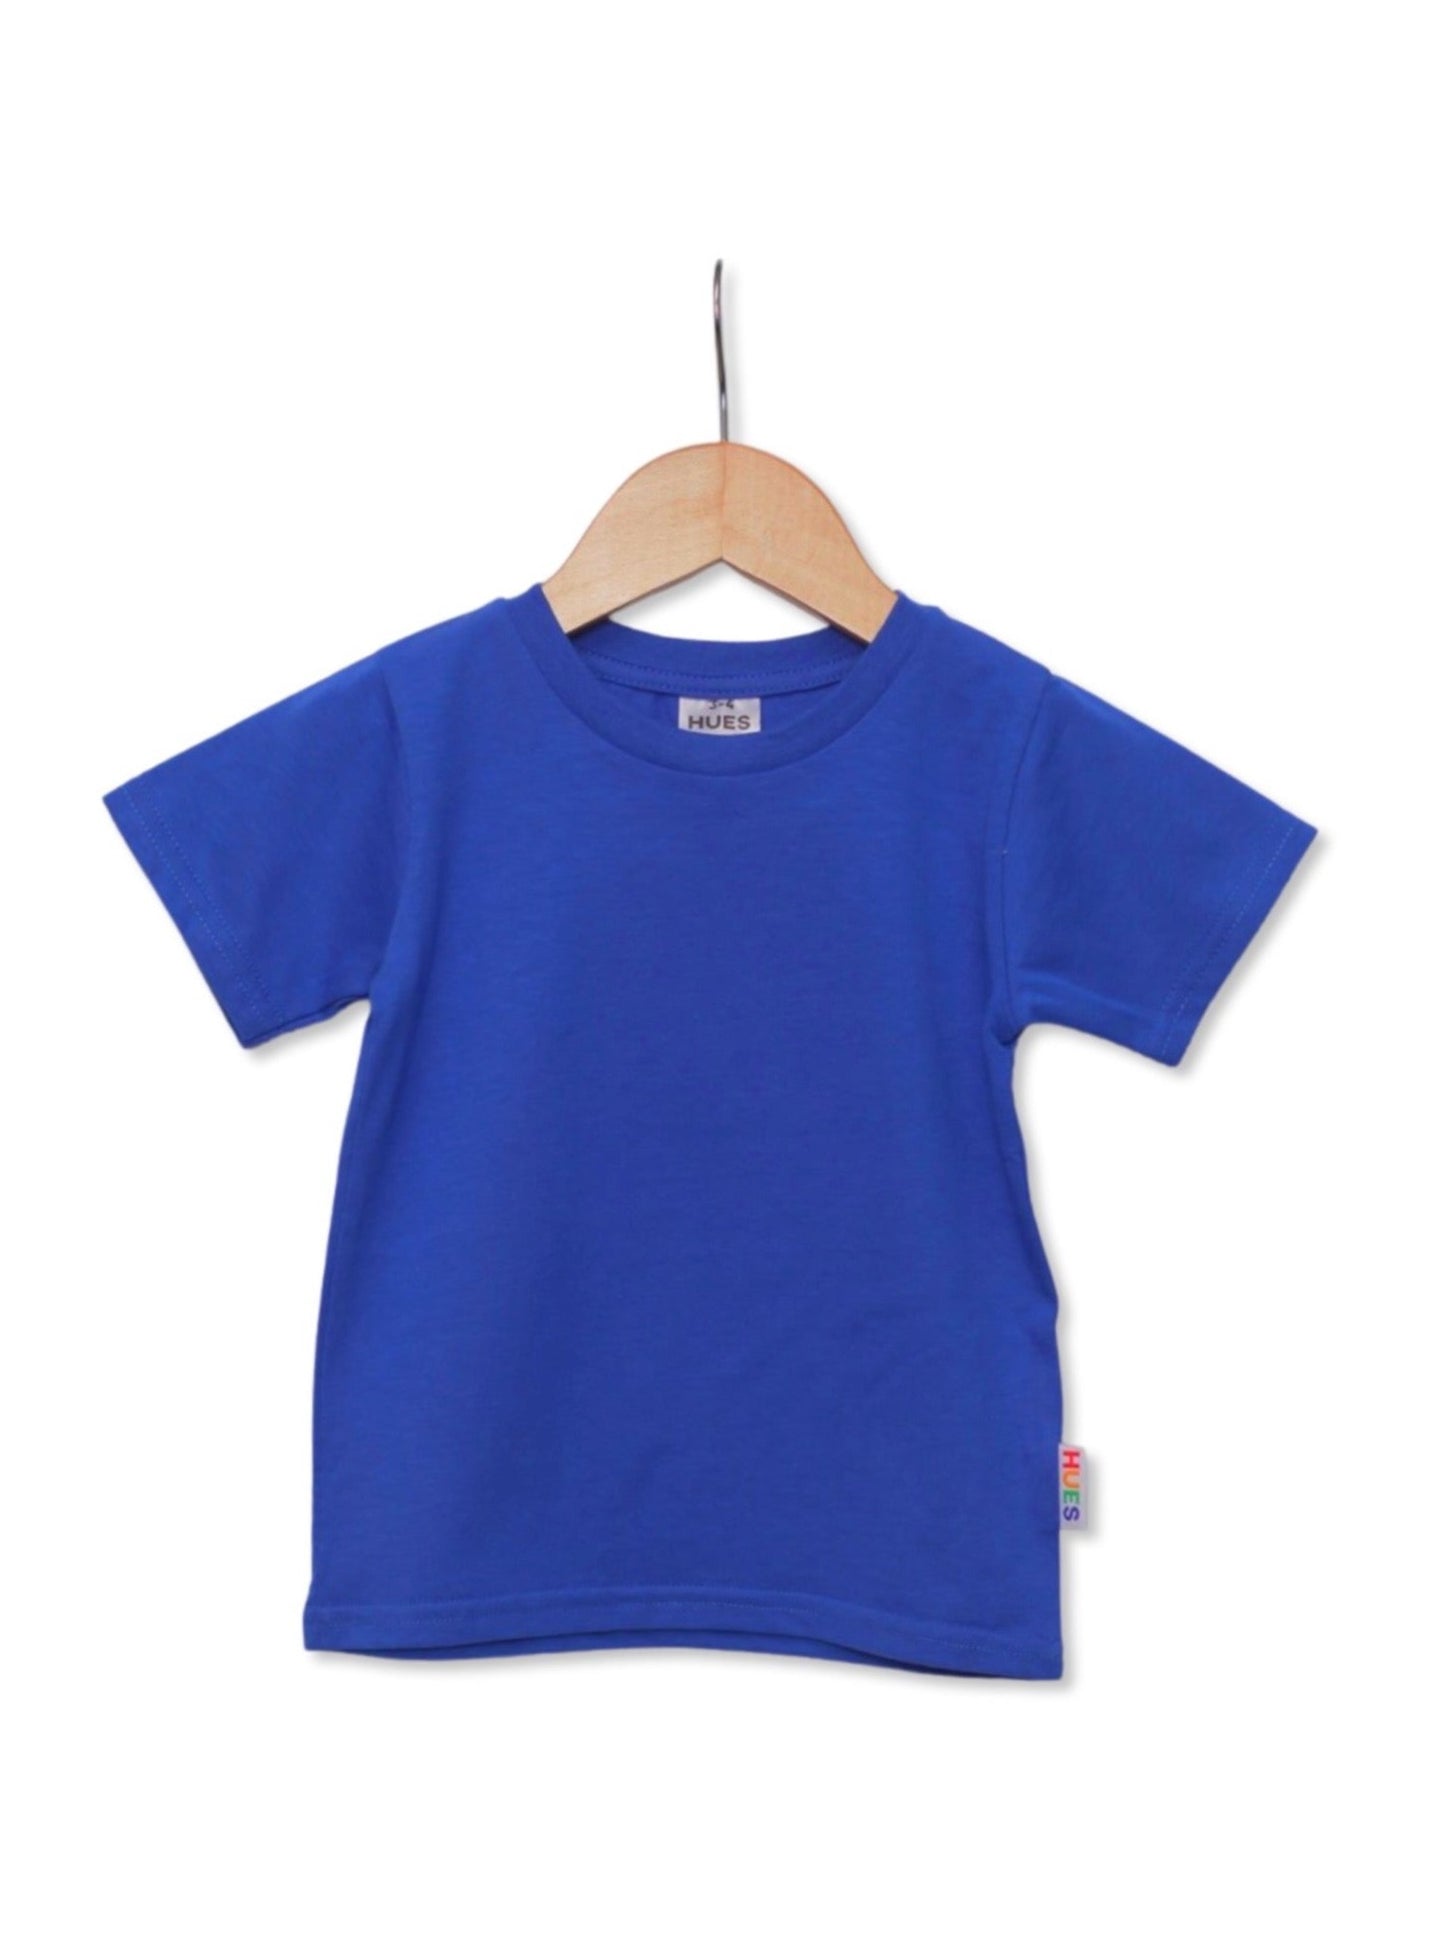 Kids Unisex Blue T-shirt Front View - Hues Clothing